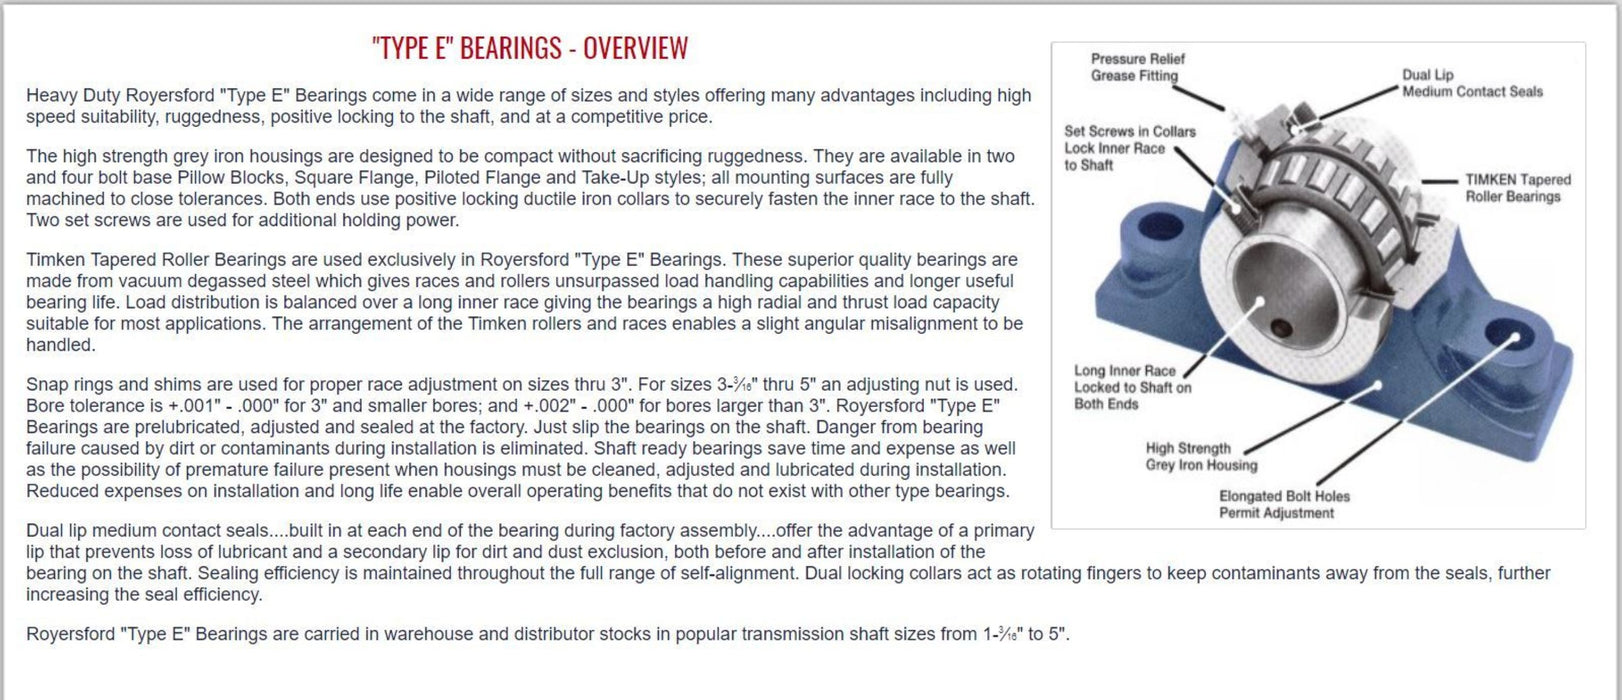 20-04-0204, Royersford Type E 4-Bolt Pillow Block Bearing, 2-1/4" with Timken Tapered Roller Bearings